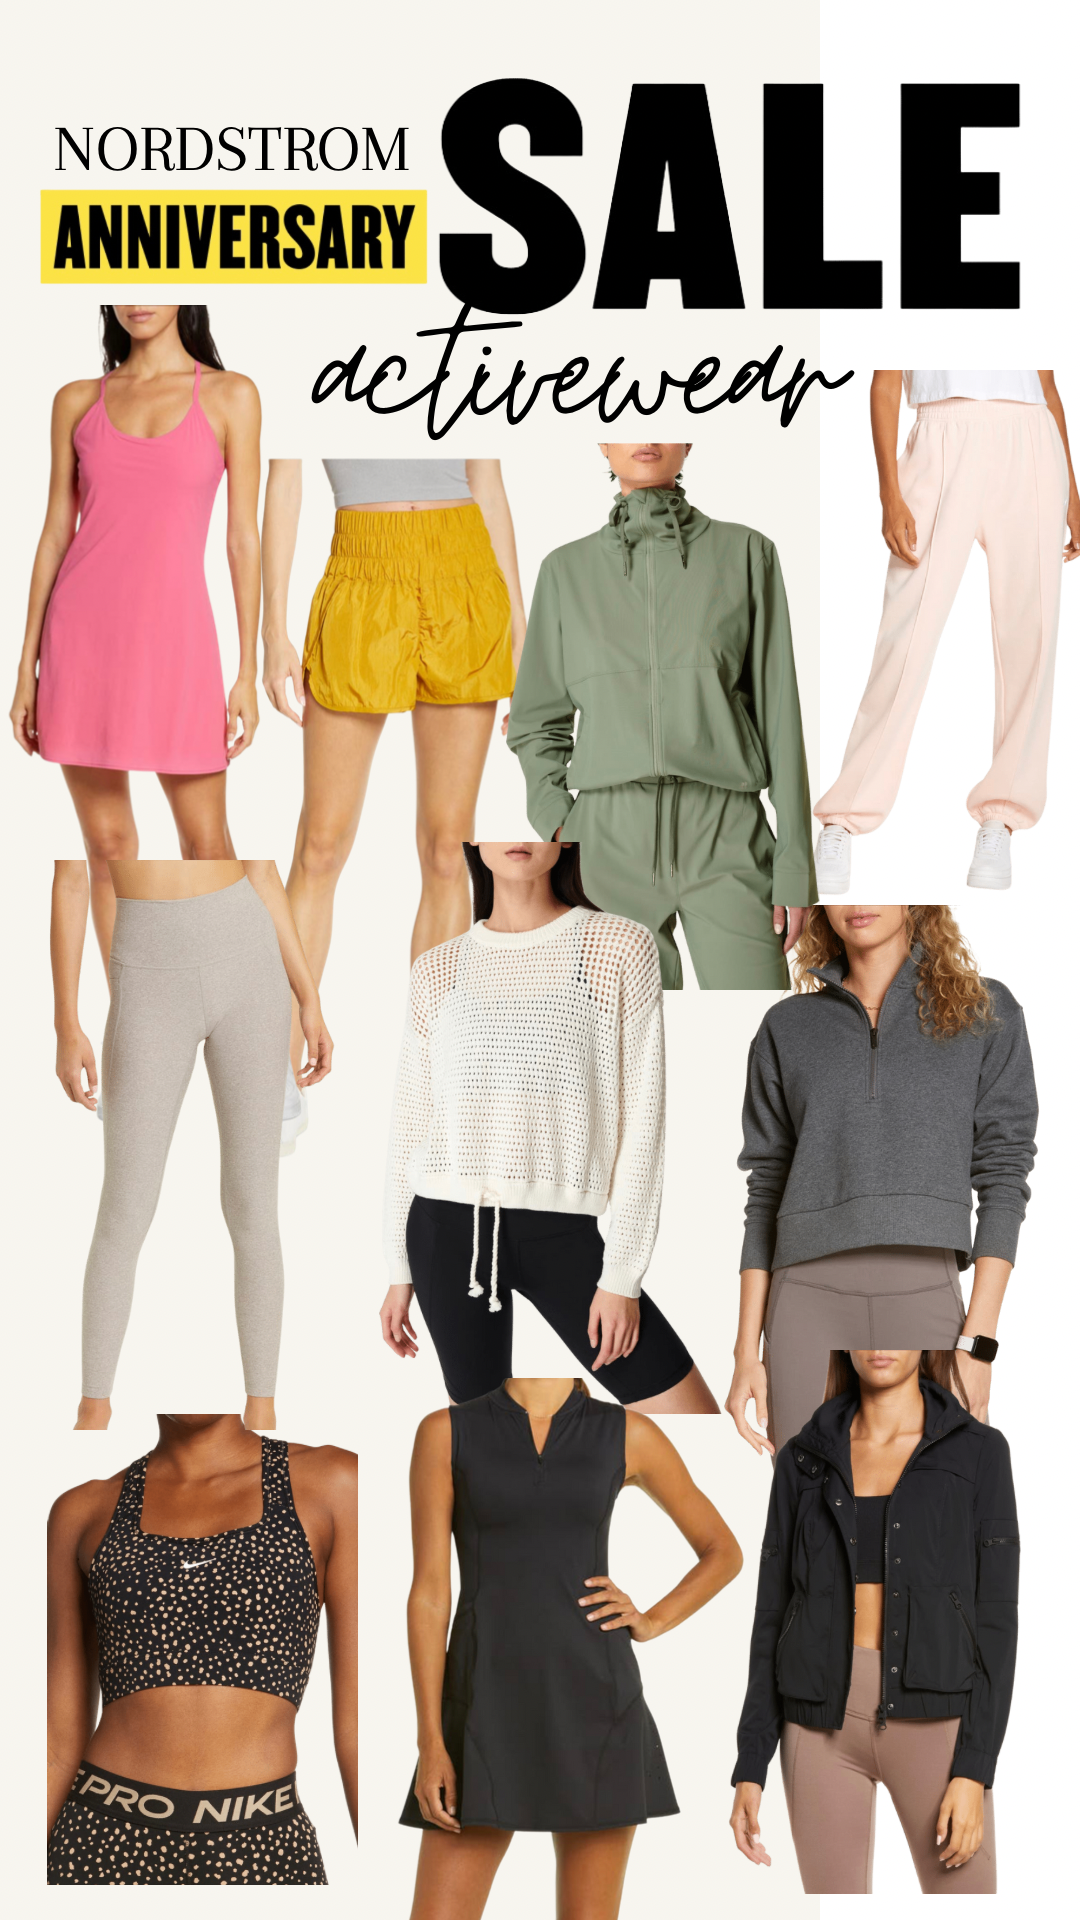 NORDSTROM ANNIVERSARY SALE 2022-MY TOP PICKS-Jaclyn De Leon Style. This years nordtroms top picks in different categories. Jackets, shoes, sweaters, dresses, handbags/accessories, tops, activewear, home, beauty, and loungewear